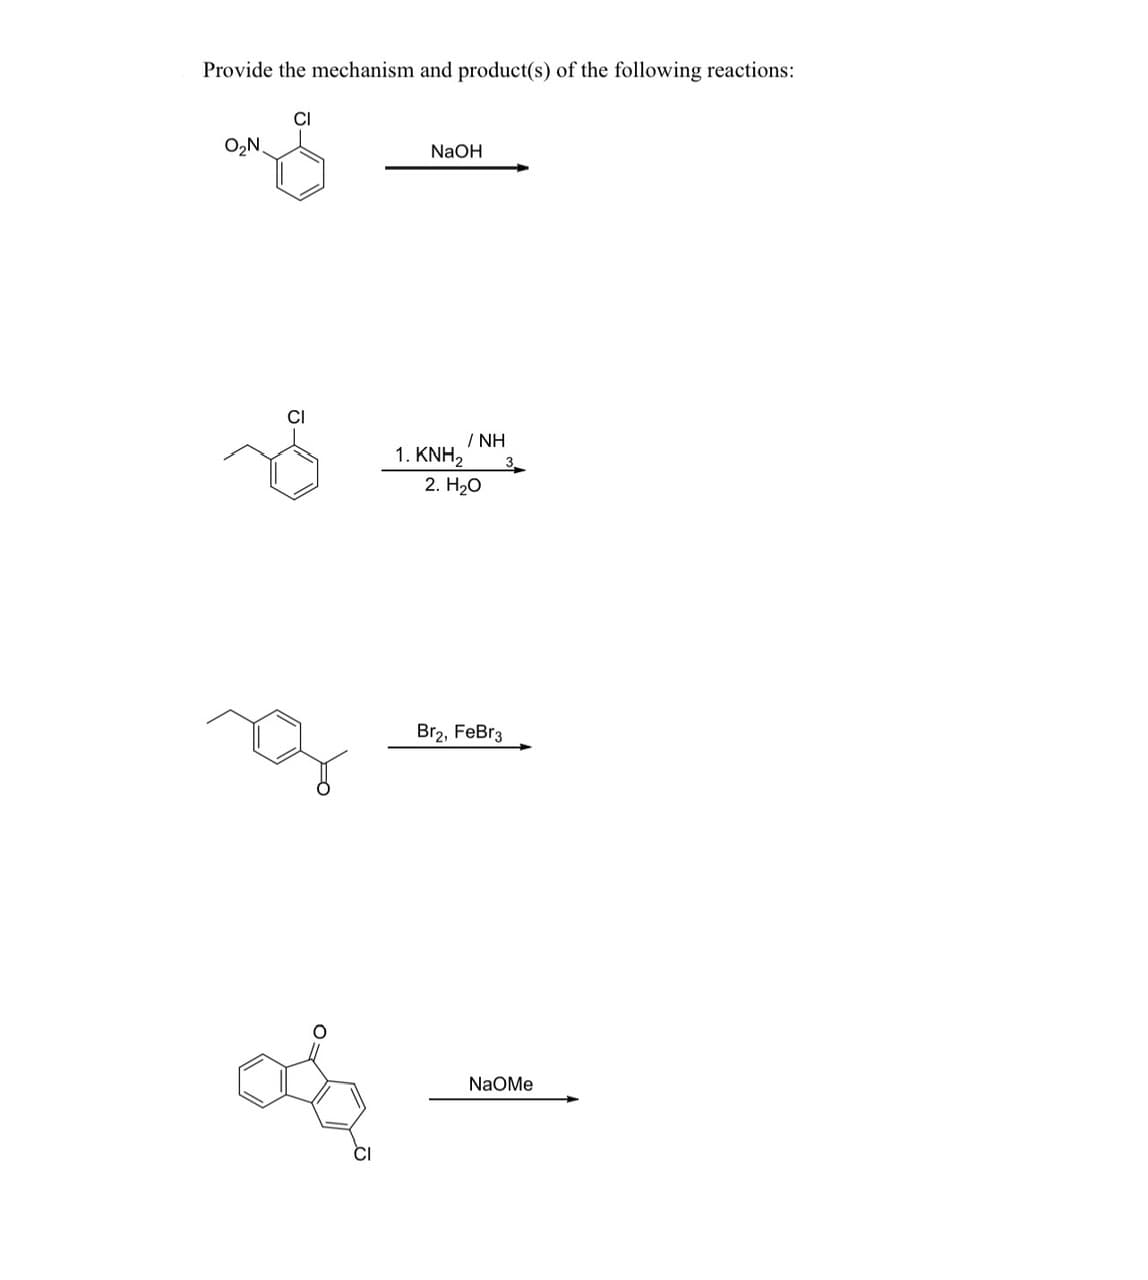 Provide the mechanism and product(s) of the following reactions:
O₂N.
CI
NaOH
da
/NH
1. KNH₂
2. H₂O
Br2, FeBr3
NaOMe